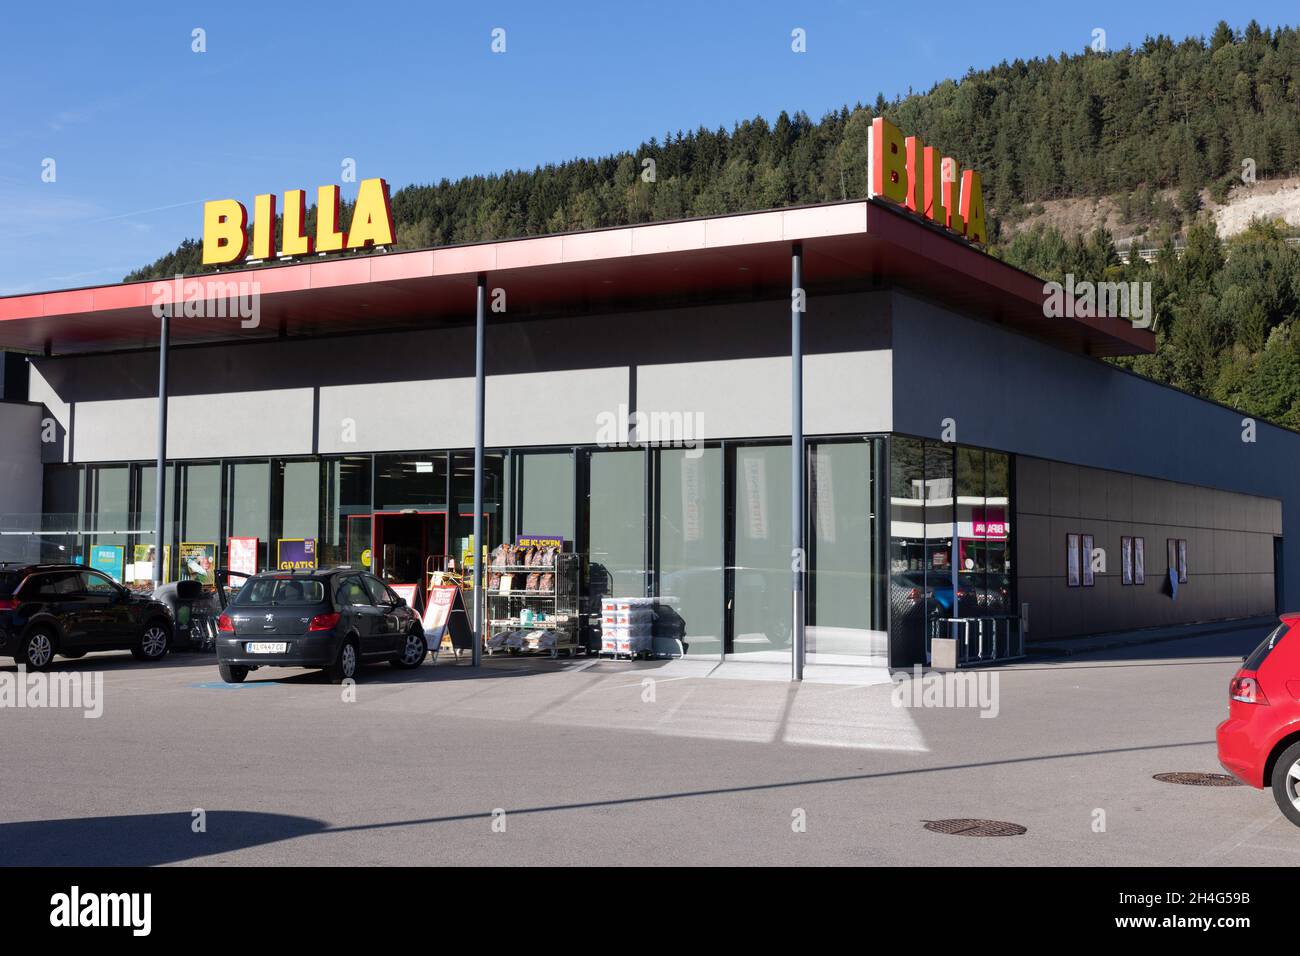 A Billa supermarket of the REWE Group in Spittal, Austria, 11.10.2021. Stock Photo